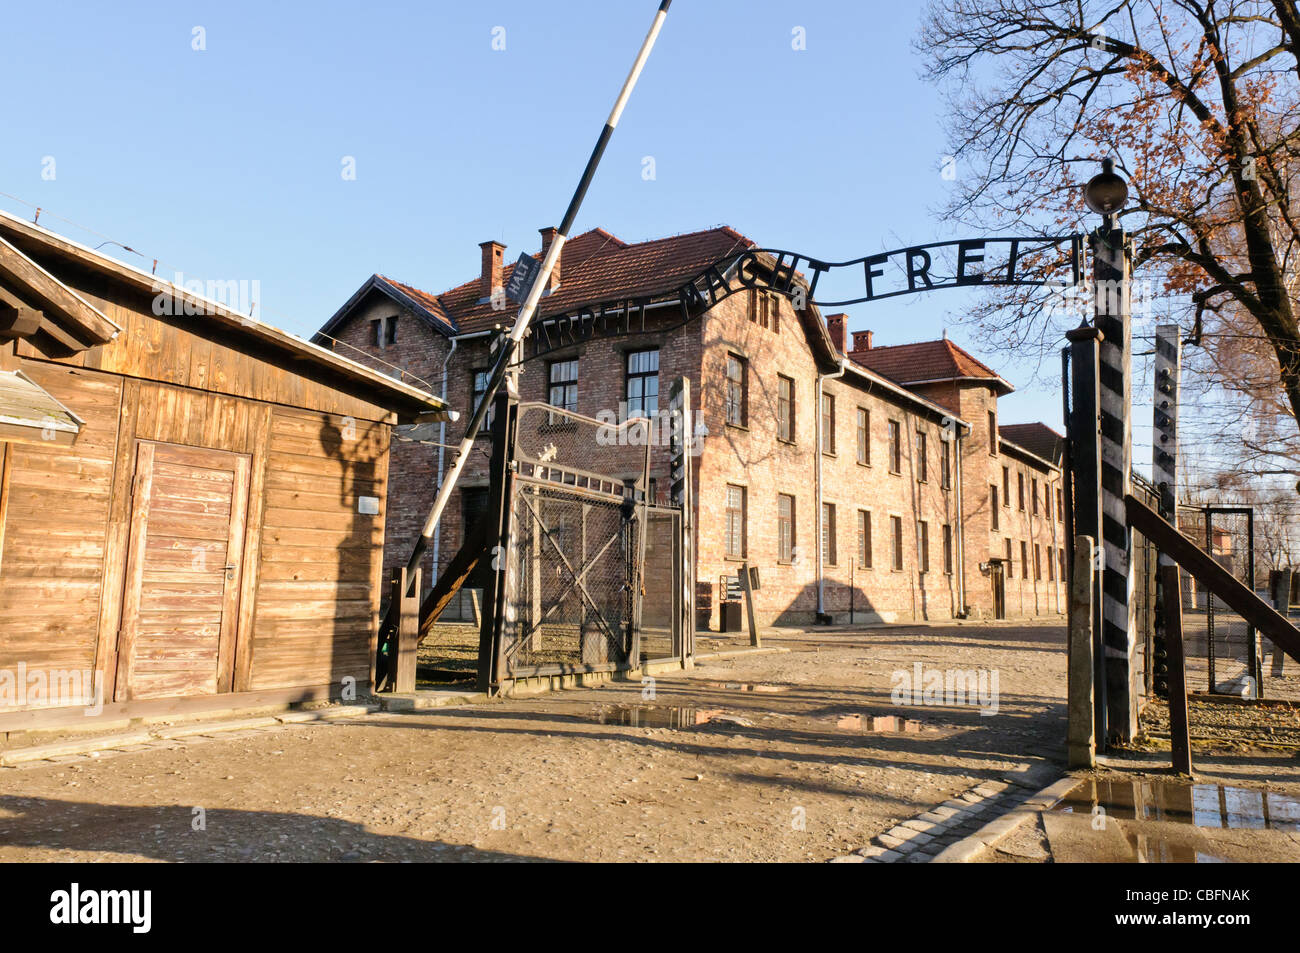 Main entrance to Auschwitz I Nazi concentration camp with sign 'Arbeit Macht Frei' Stock Photo